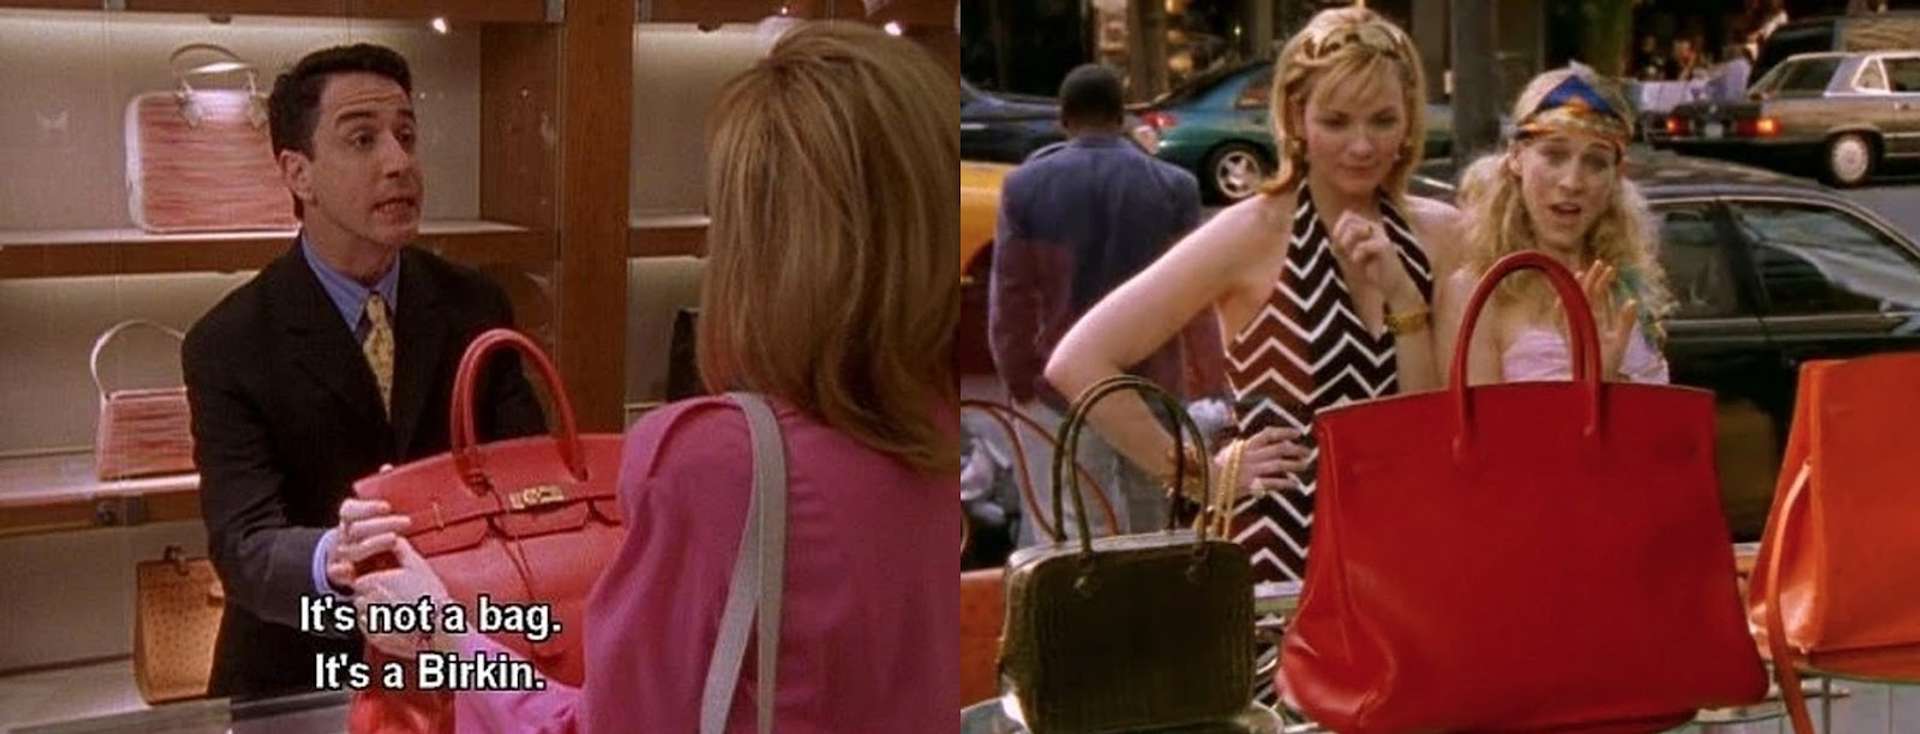 Screenshots from the TV show Sex And The City. The left one shows a fictitious Hermès salesperson saying the caption “It’s not a bag. It’s a Birkin.” The right one shows the characters Samantha and Carrie looking at a Birkin bag through a shop window.